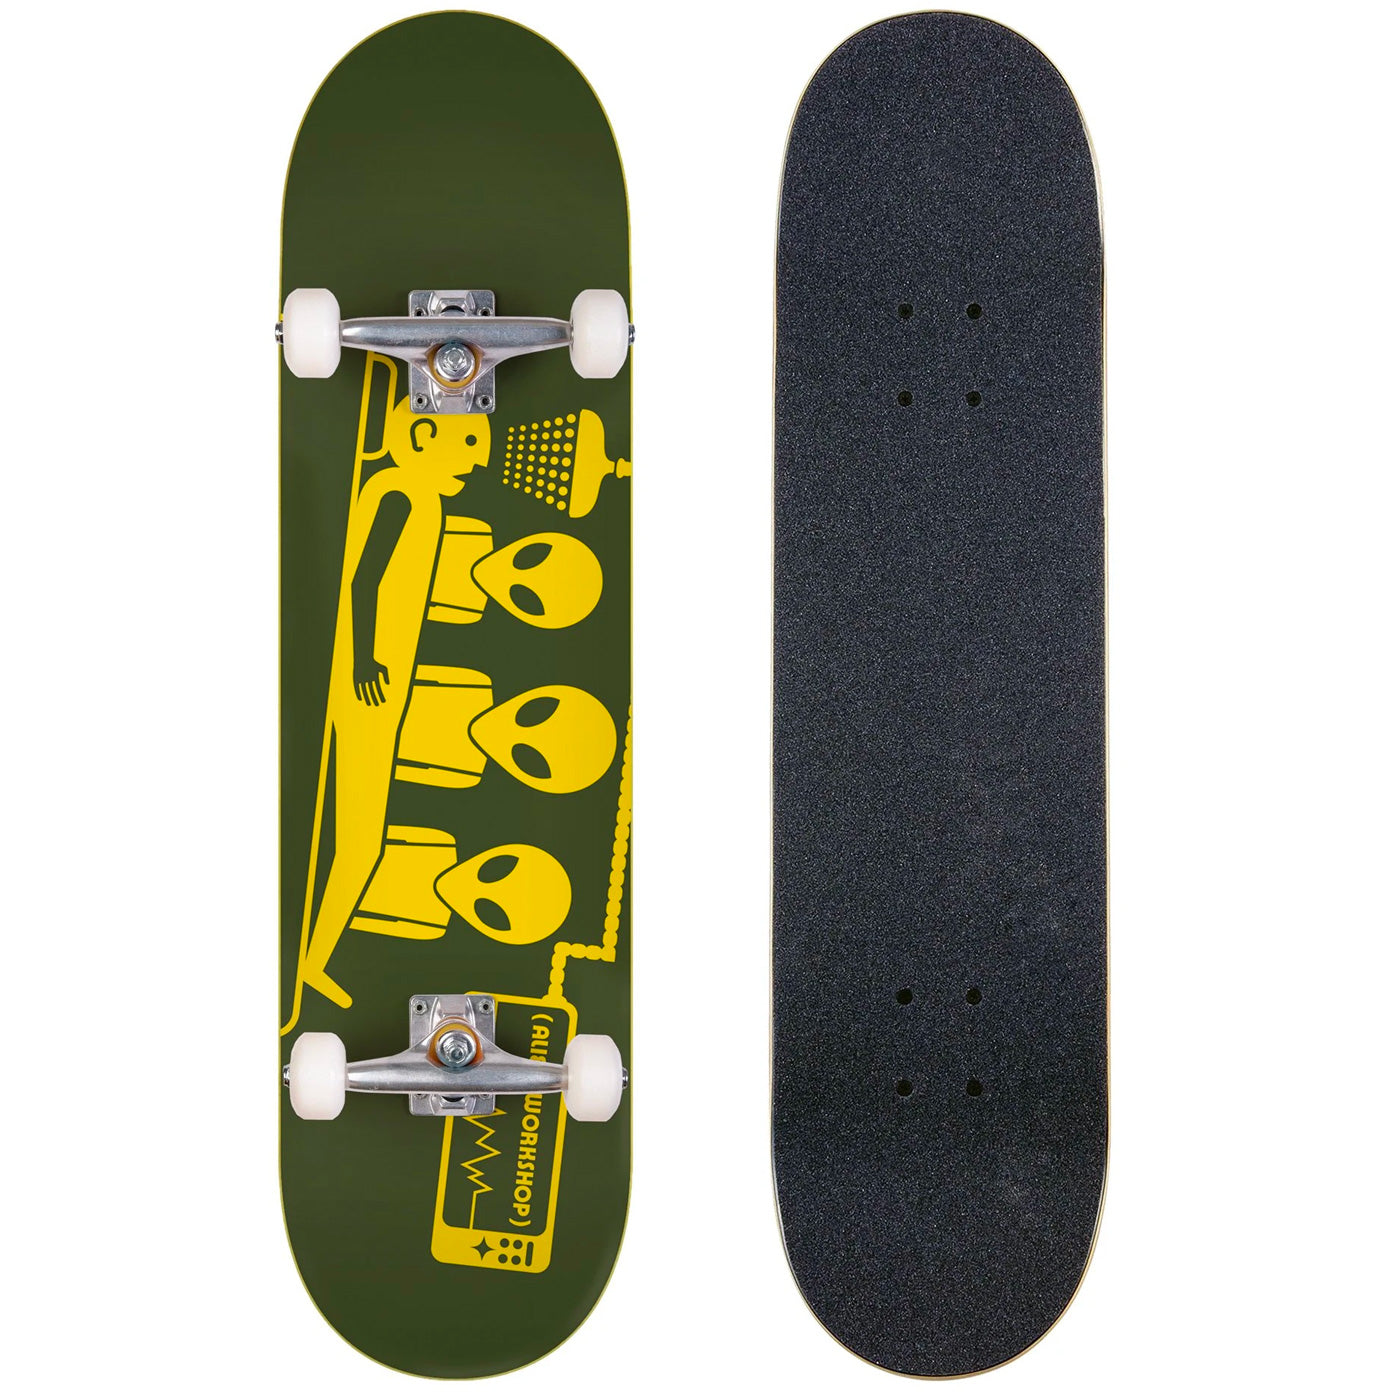 Alien skateboard 8.25 'abduction army' graphic yellow and green complete skateboard